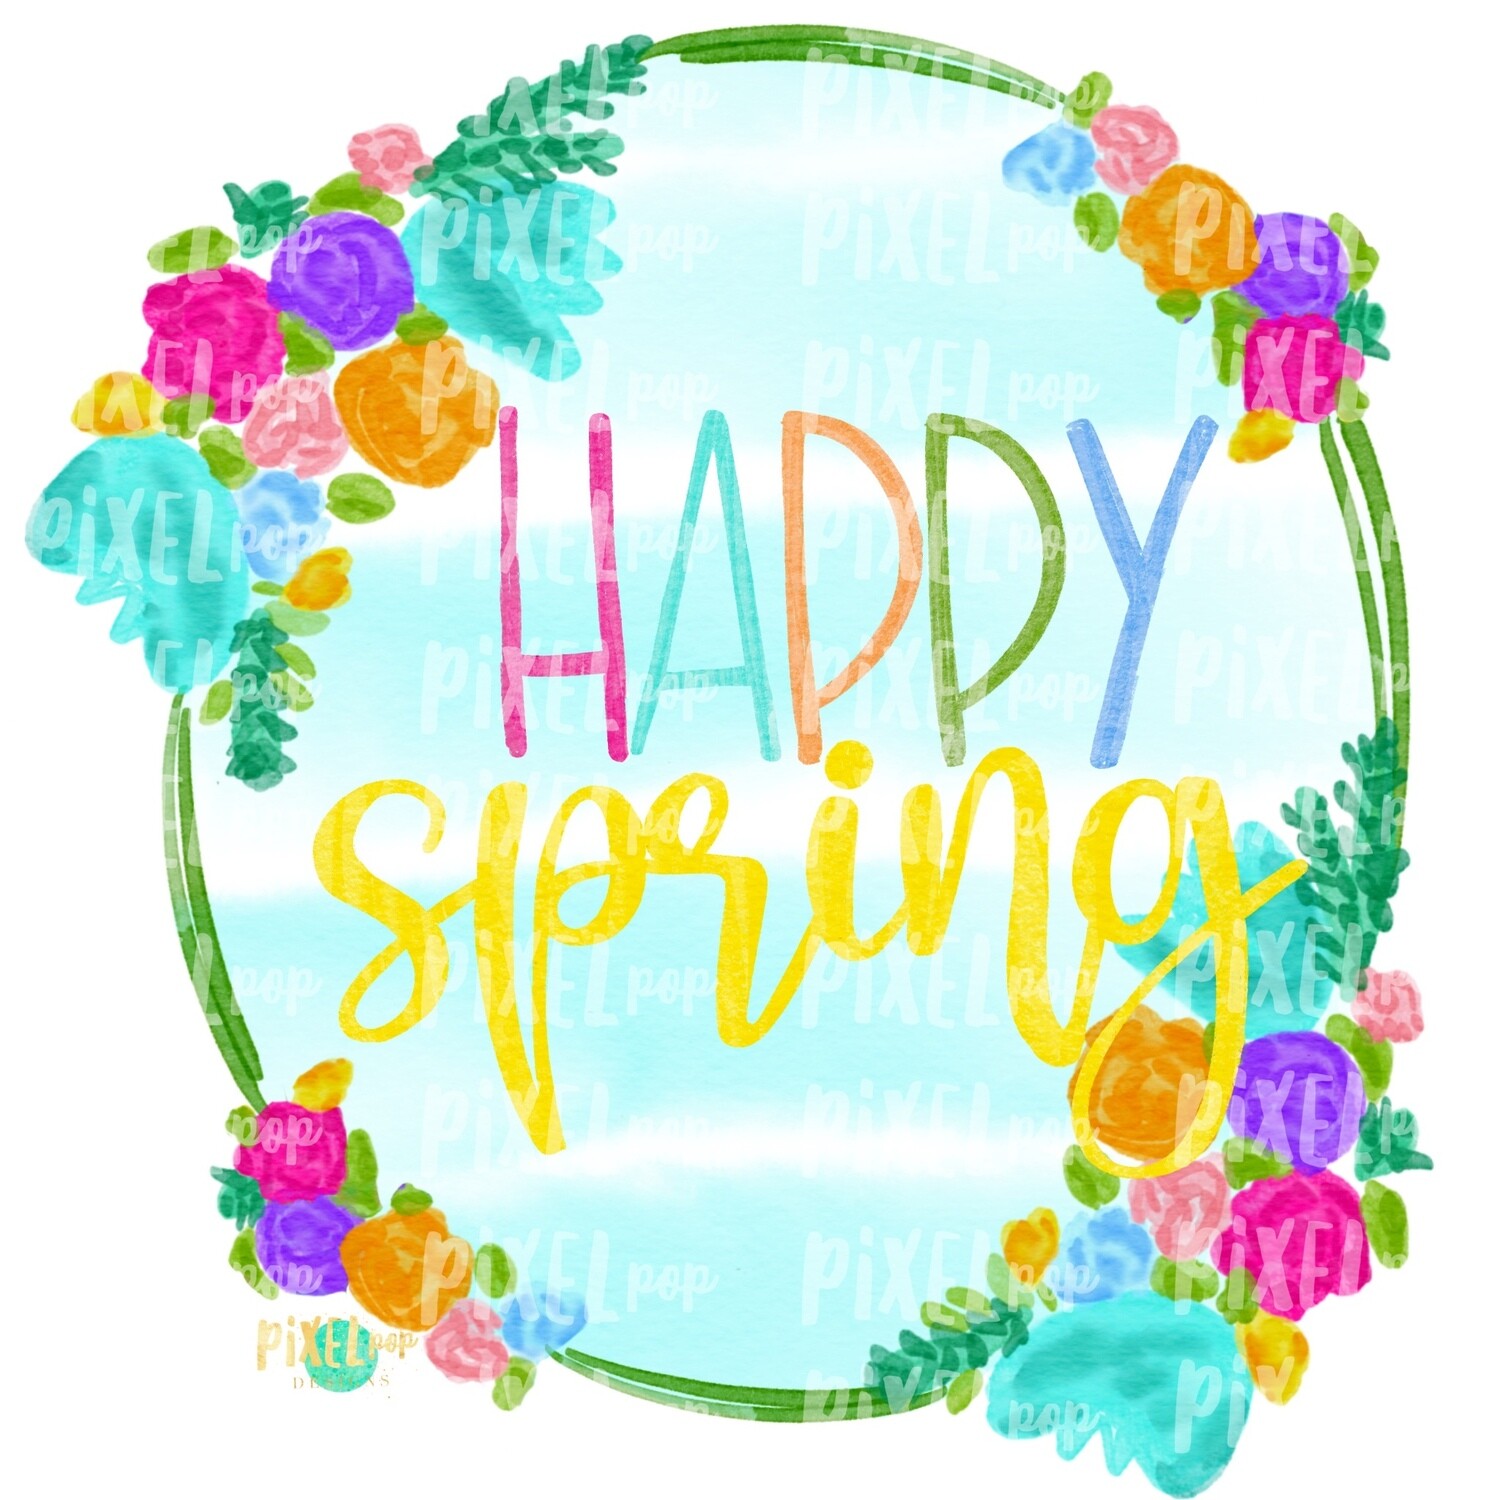 Happy Spring Watercolor Floral Striped Wreath Sublimation PNG | Digital Painting | Spring Flowers | Flower Wreath | Watercolor Floral Art